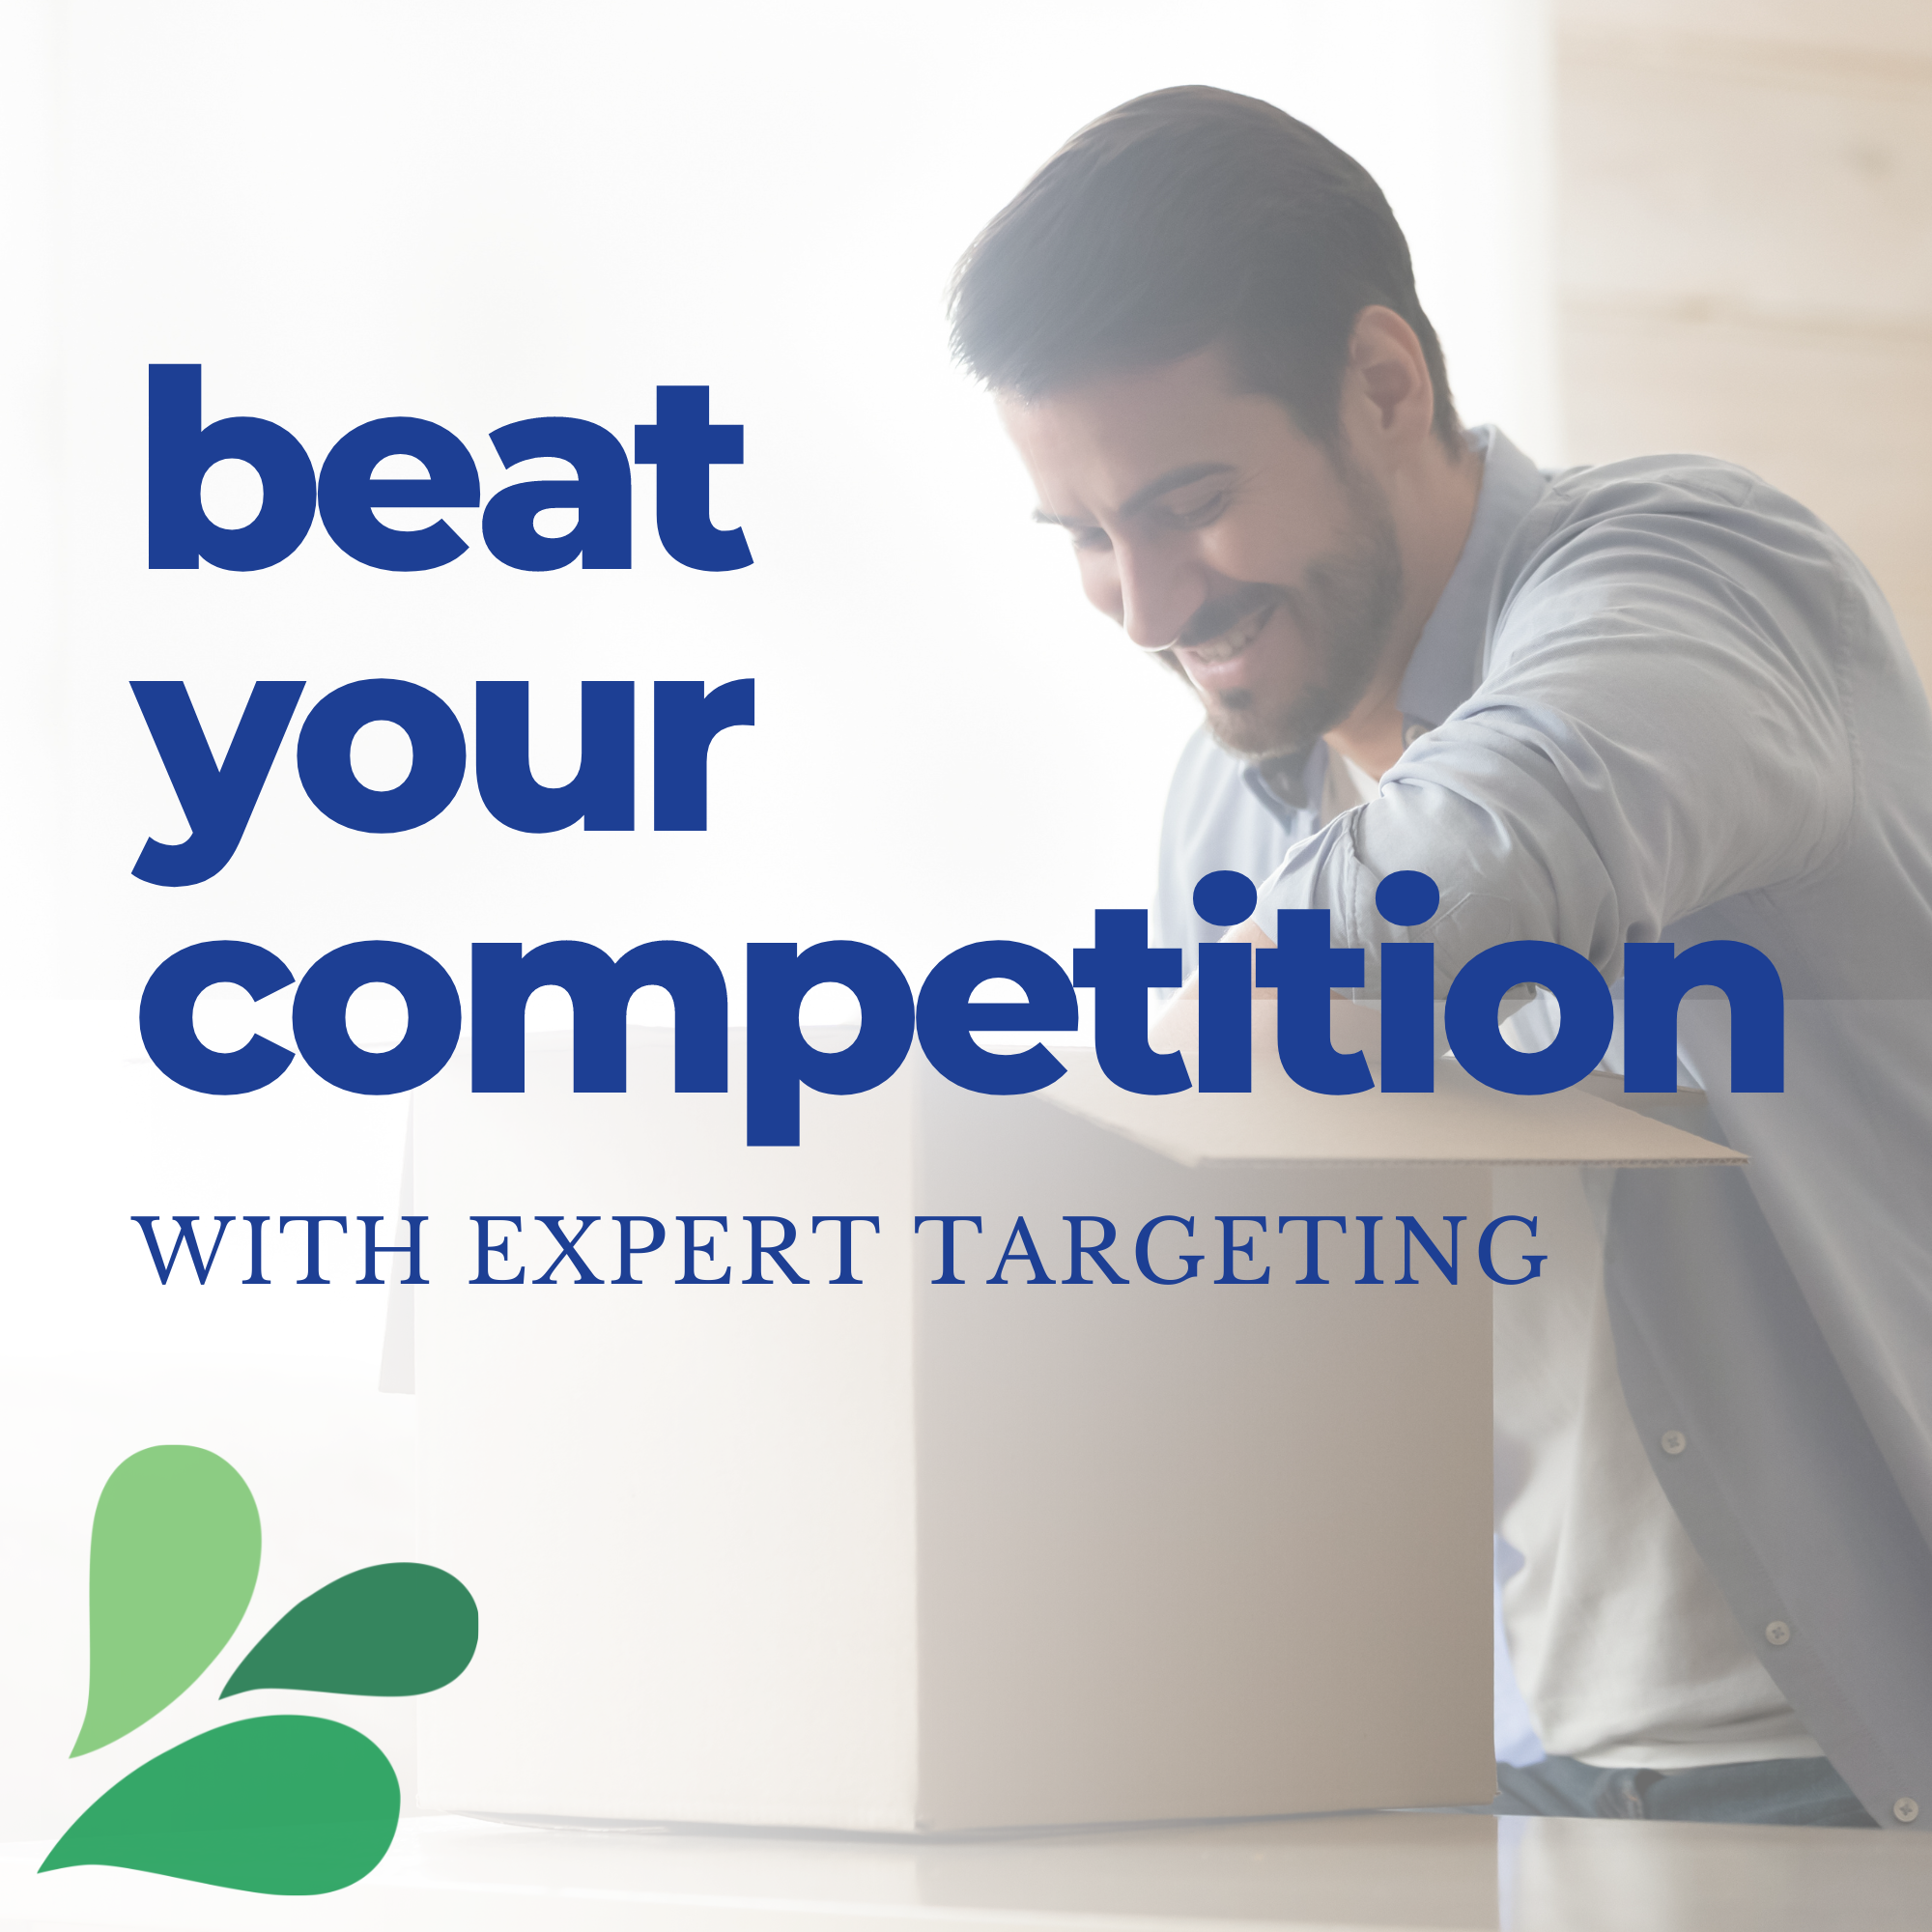 man smiling unpacking a box with text overlay beat your competition with expert targeting and Robb Digital logo